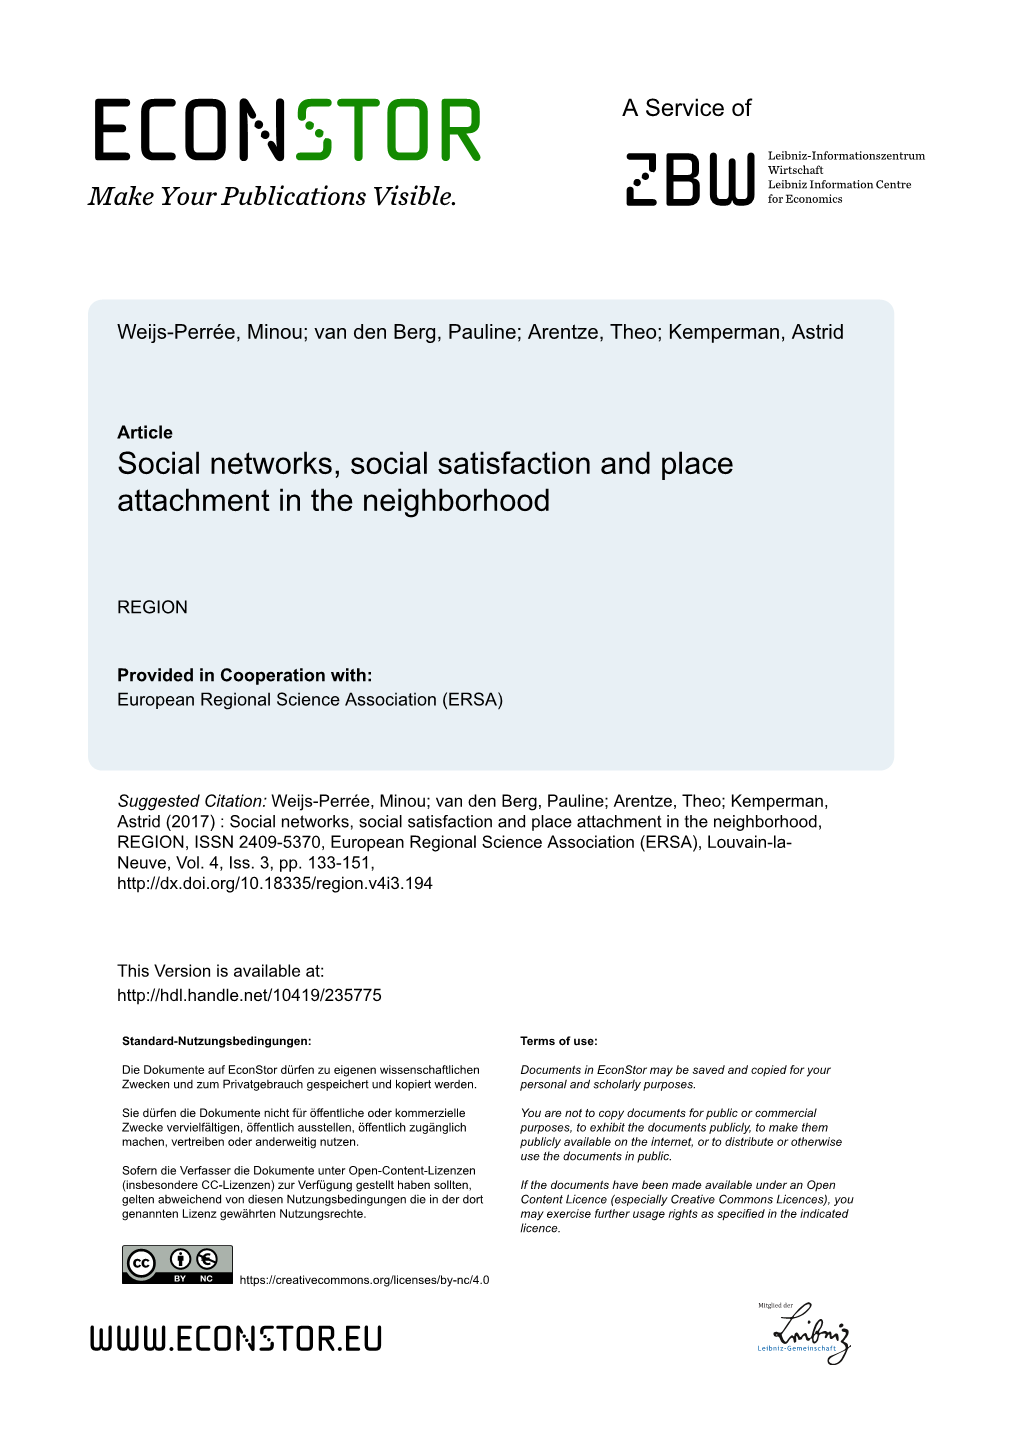 Social Networks, Social Satisfaction and Place Attachment in the Neighborhood